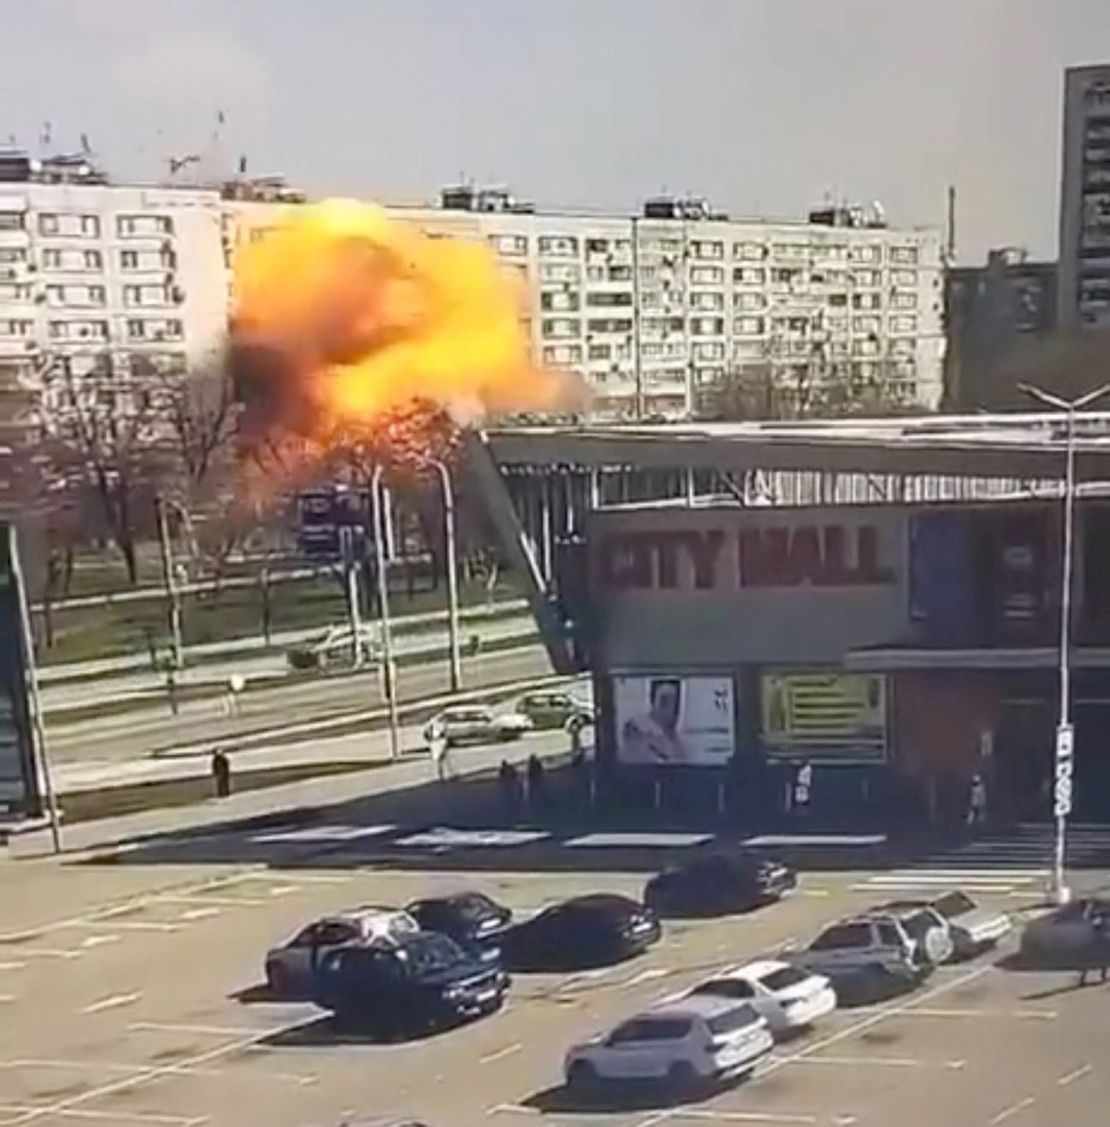 A view of CCTV footage of the moment of a missile strike in Zaporizhzhia, Ukraine March 22, in this screengrab obtained from a social media video. 